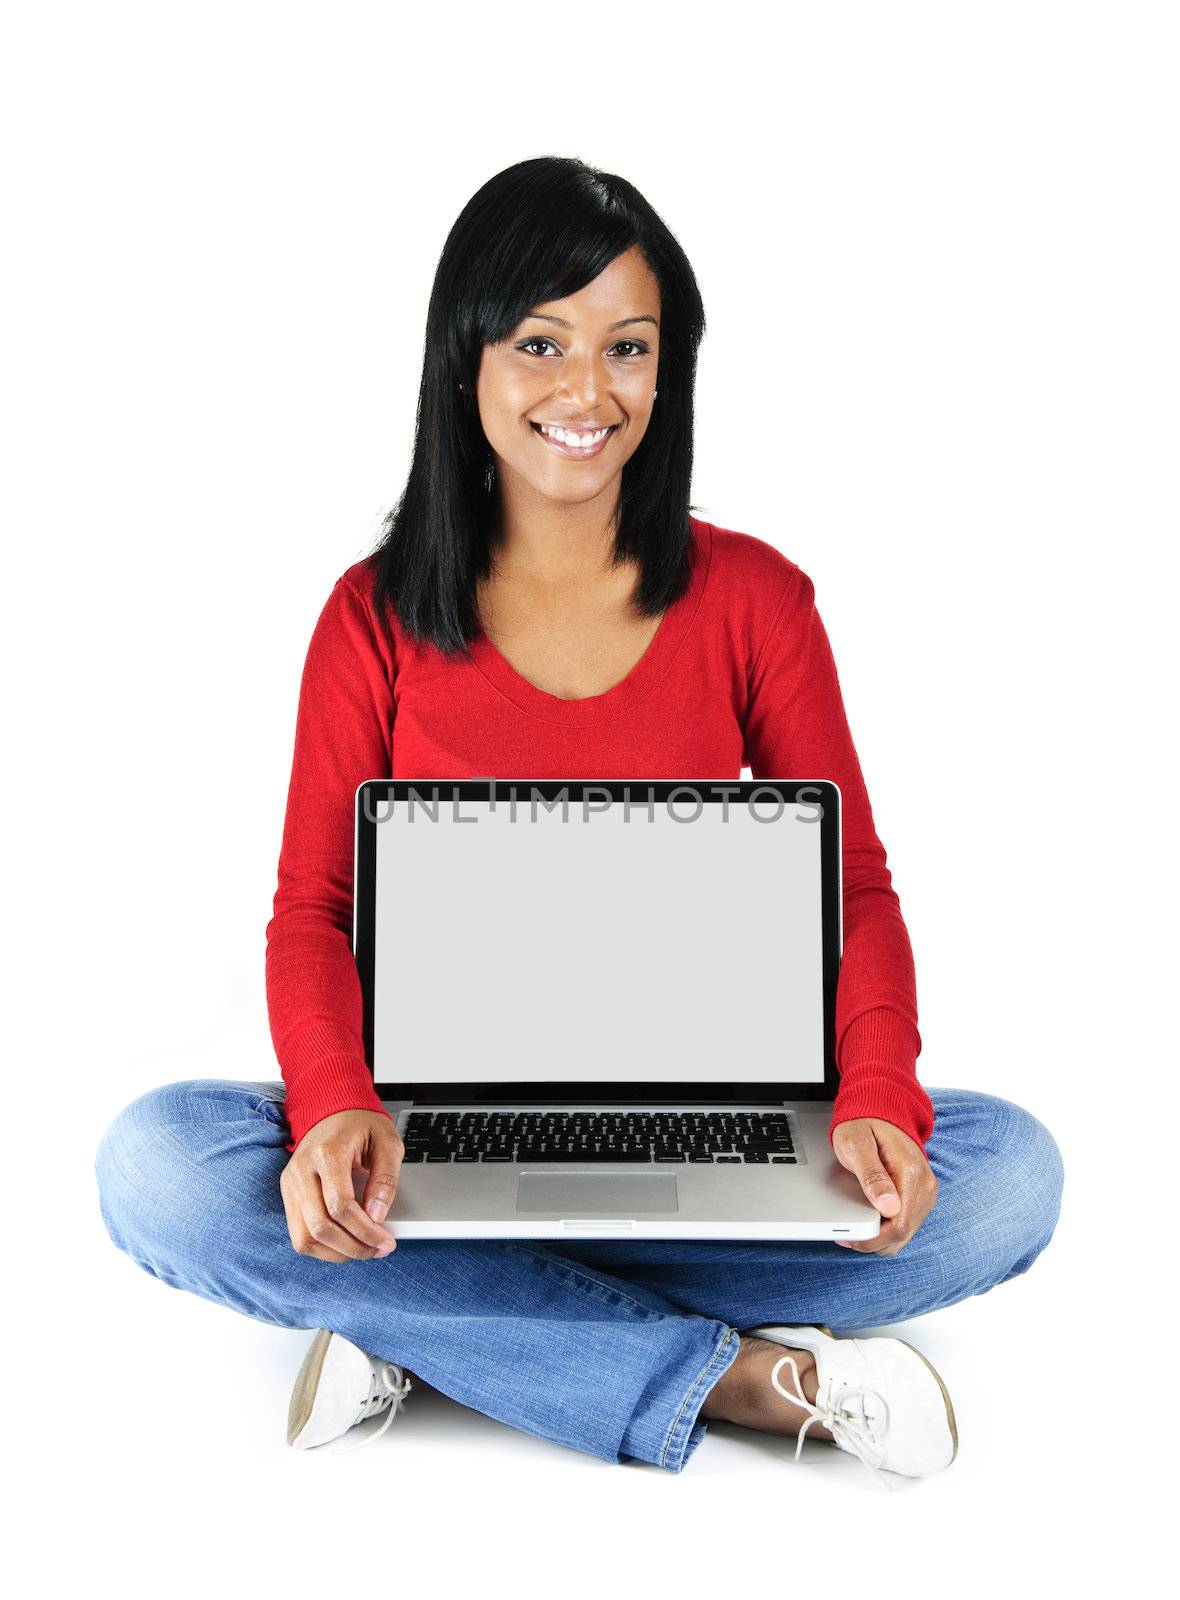 Black woman showing computer screen sitting and smiling